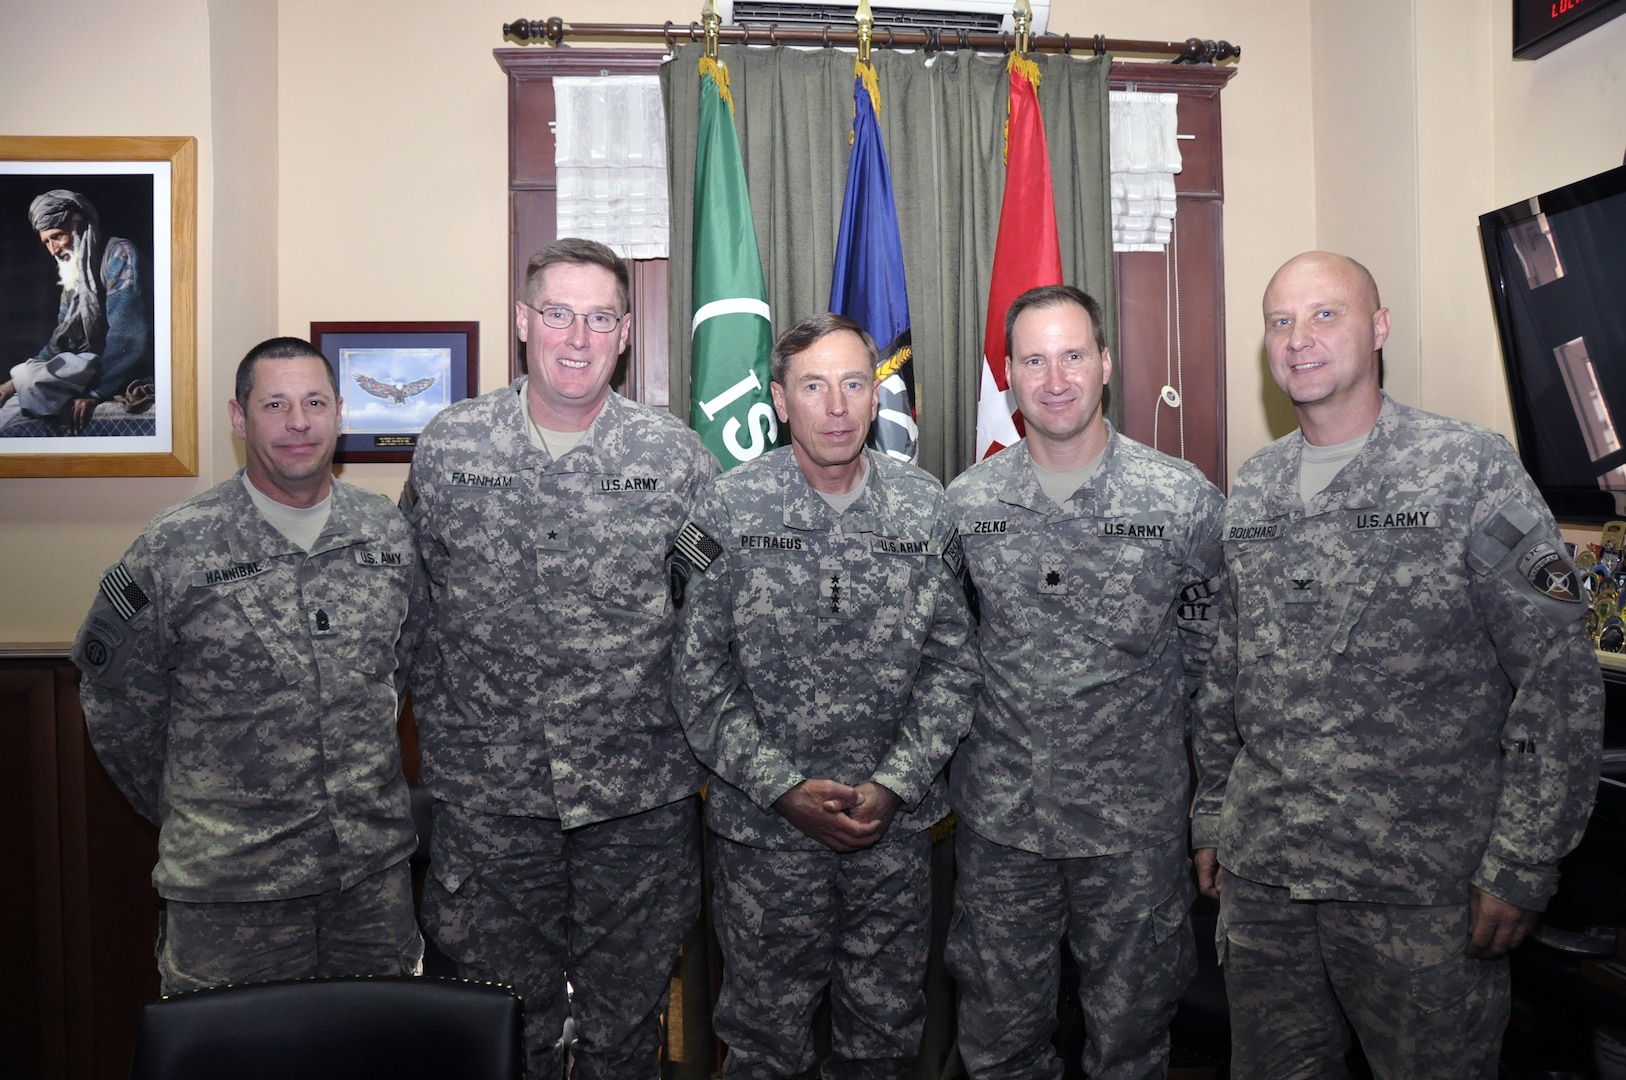 Members of the Afghan National Security Forces Development Assistance Bureau (ADAB) team from left to right are: Command Sgt. Maj. Richard Hannibal, Brig. Gen. Jonathan Farnham, director of the Afghan National Security Forces (ANSF) Development Assistance Bureau; Gen. John Petraeus, Lt. Col. Tom Zelko, a Vermont Guard member and ANA division chief; and Col. Mike Bouchard of the Maine Army National Guard and the ANP division chief, pose for a group photo after briefing Petraeus on Afghan Security Force developments.